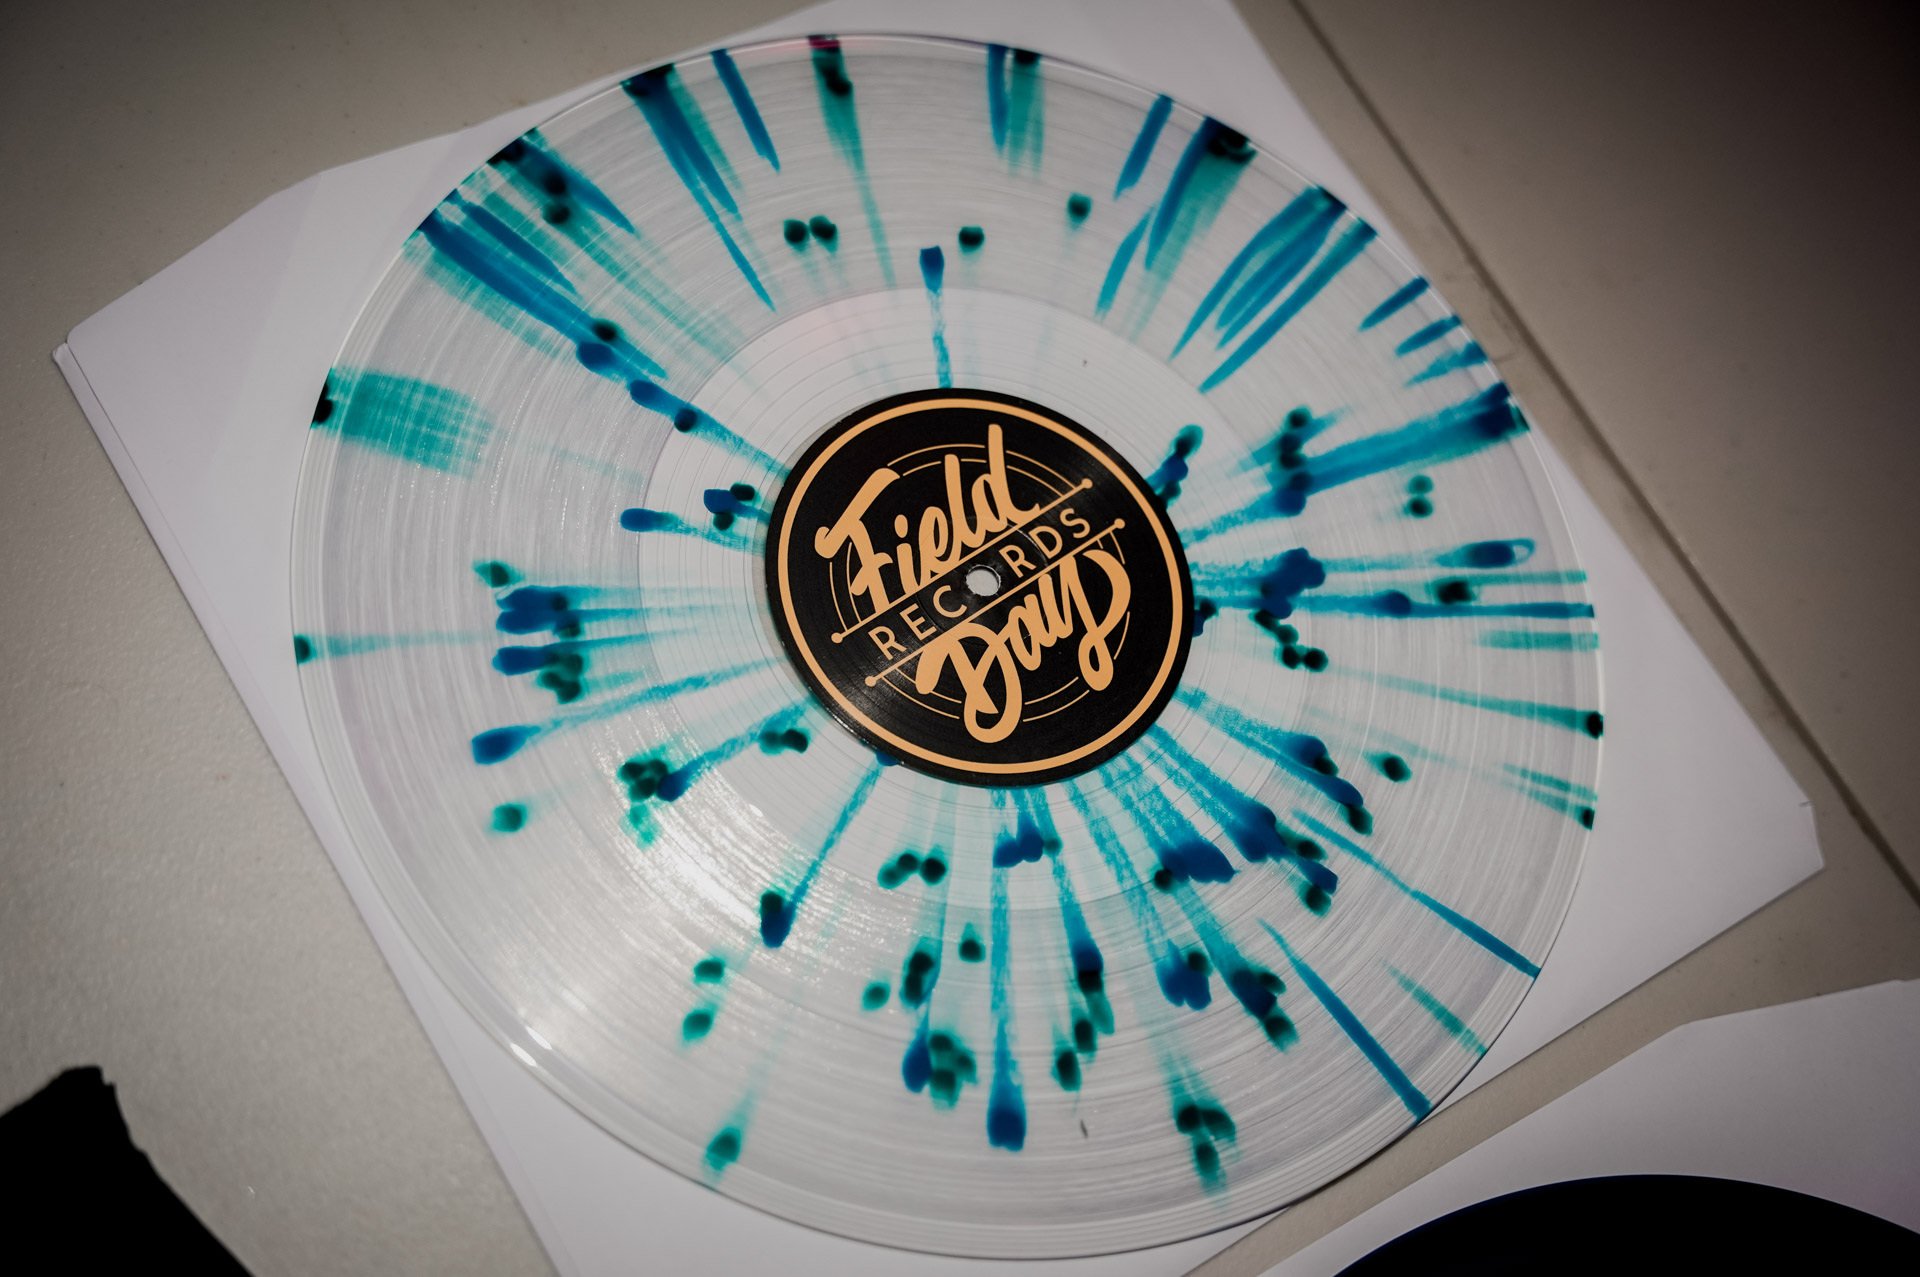 A colorful vinyl record